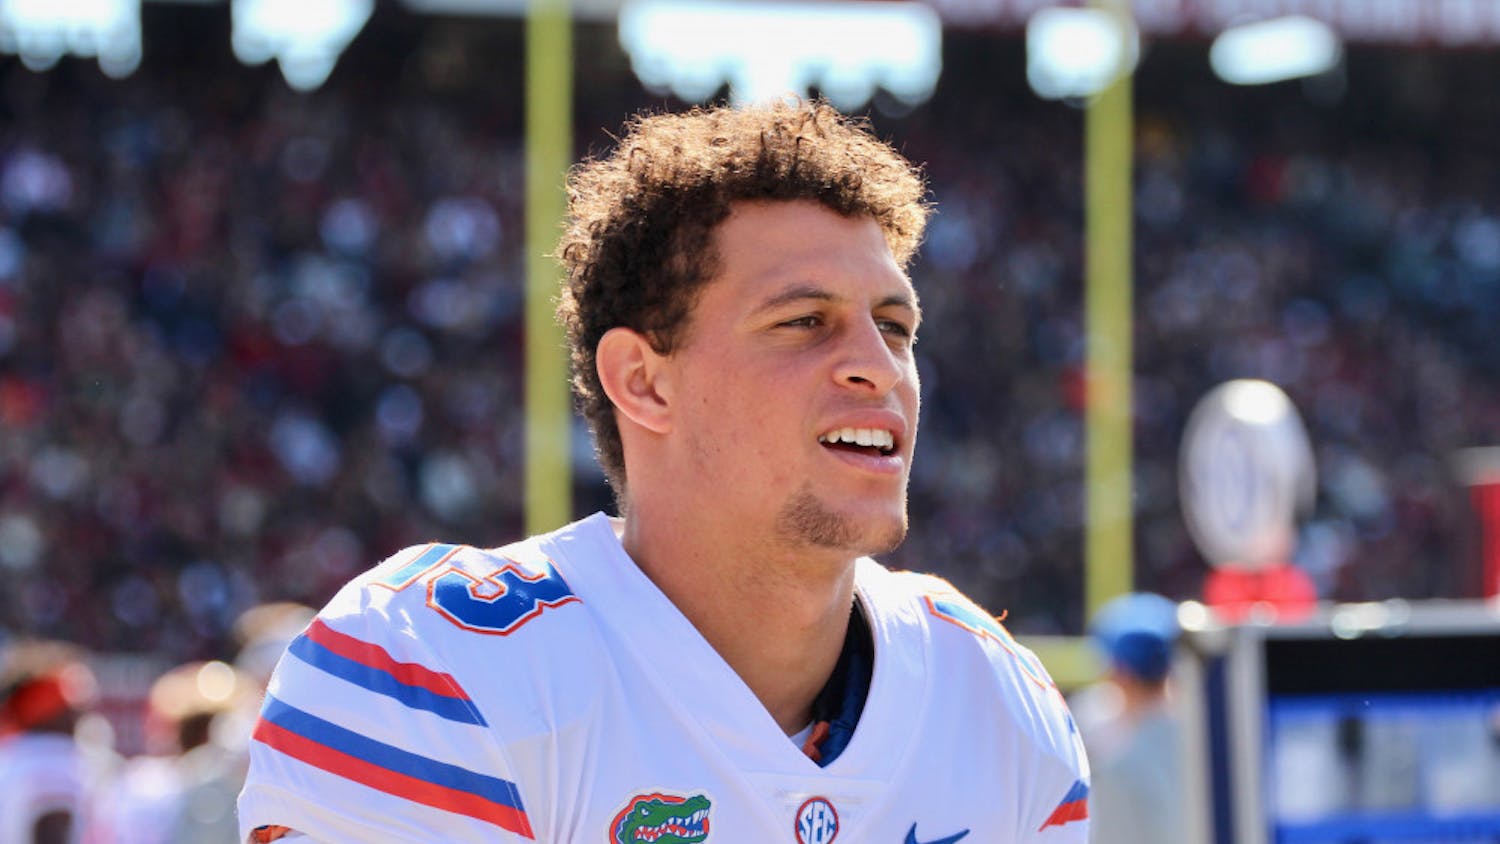 Feleipe Franks threw a career-high three interceptions and also lost one fumble in Florida's 38-22 defeat to Florida State.